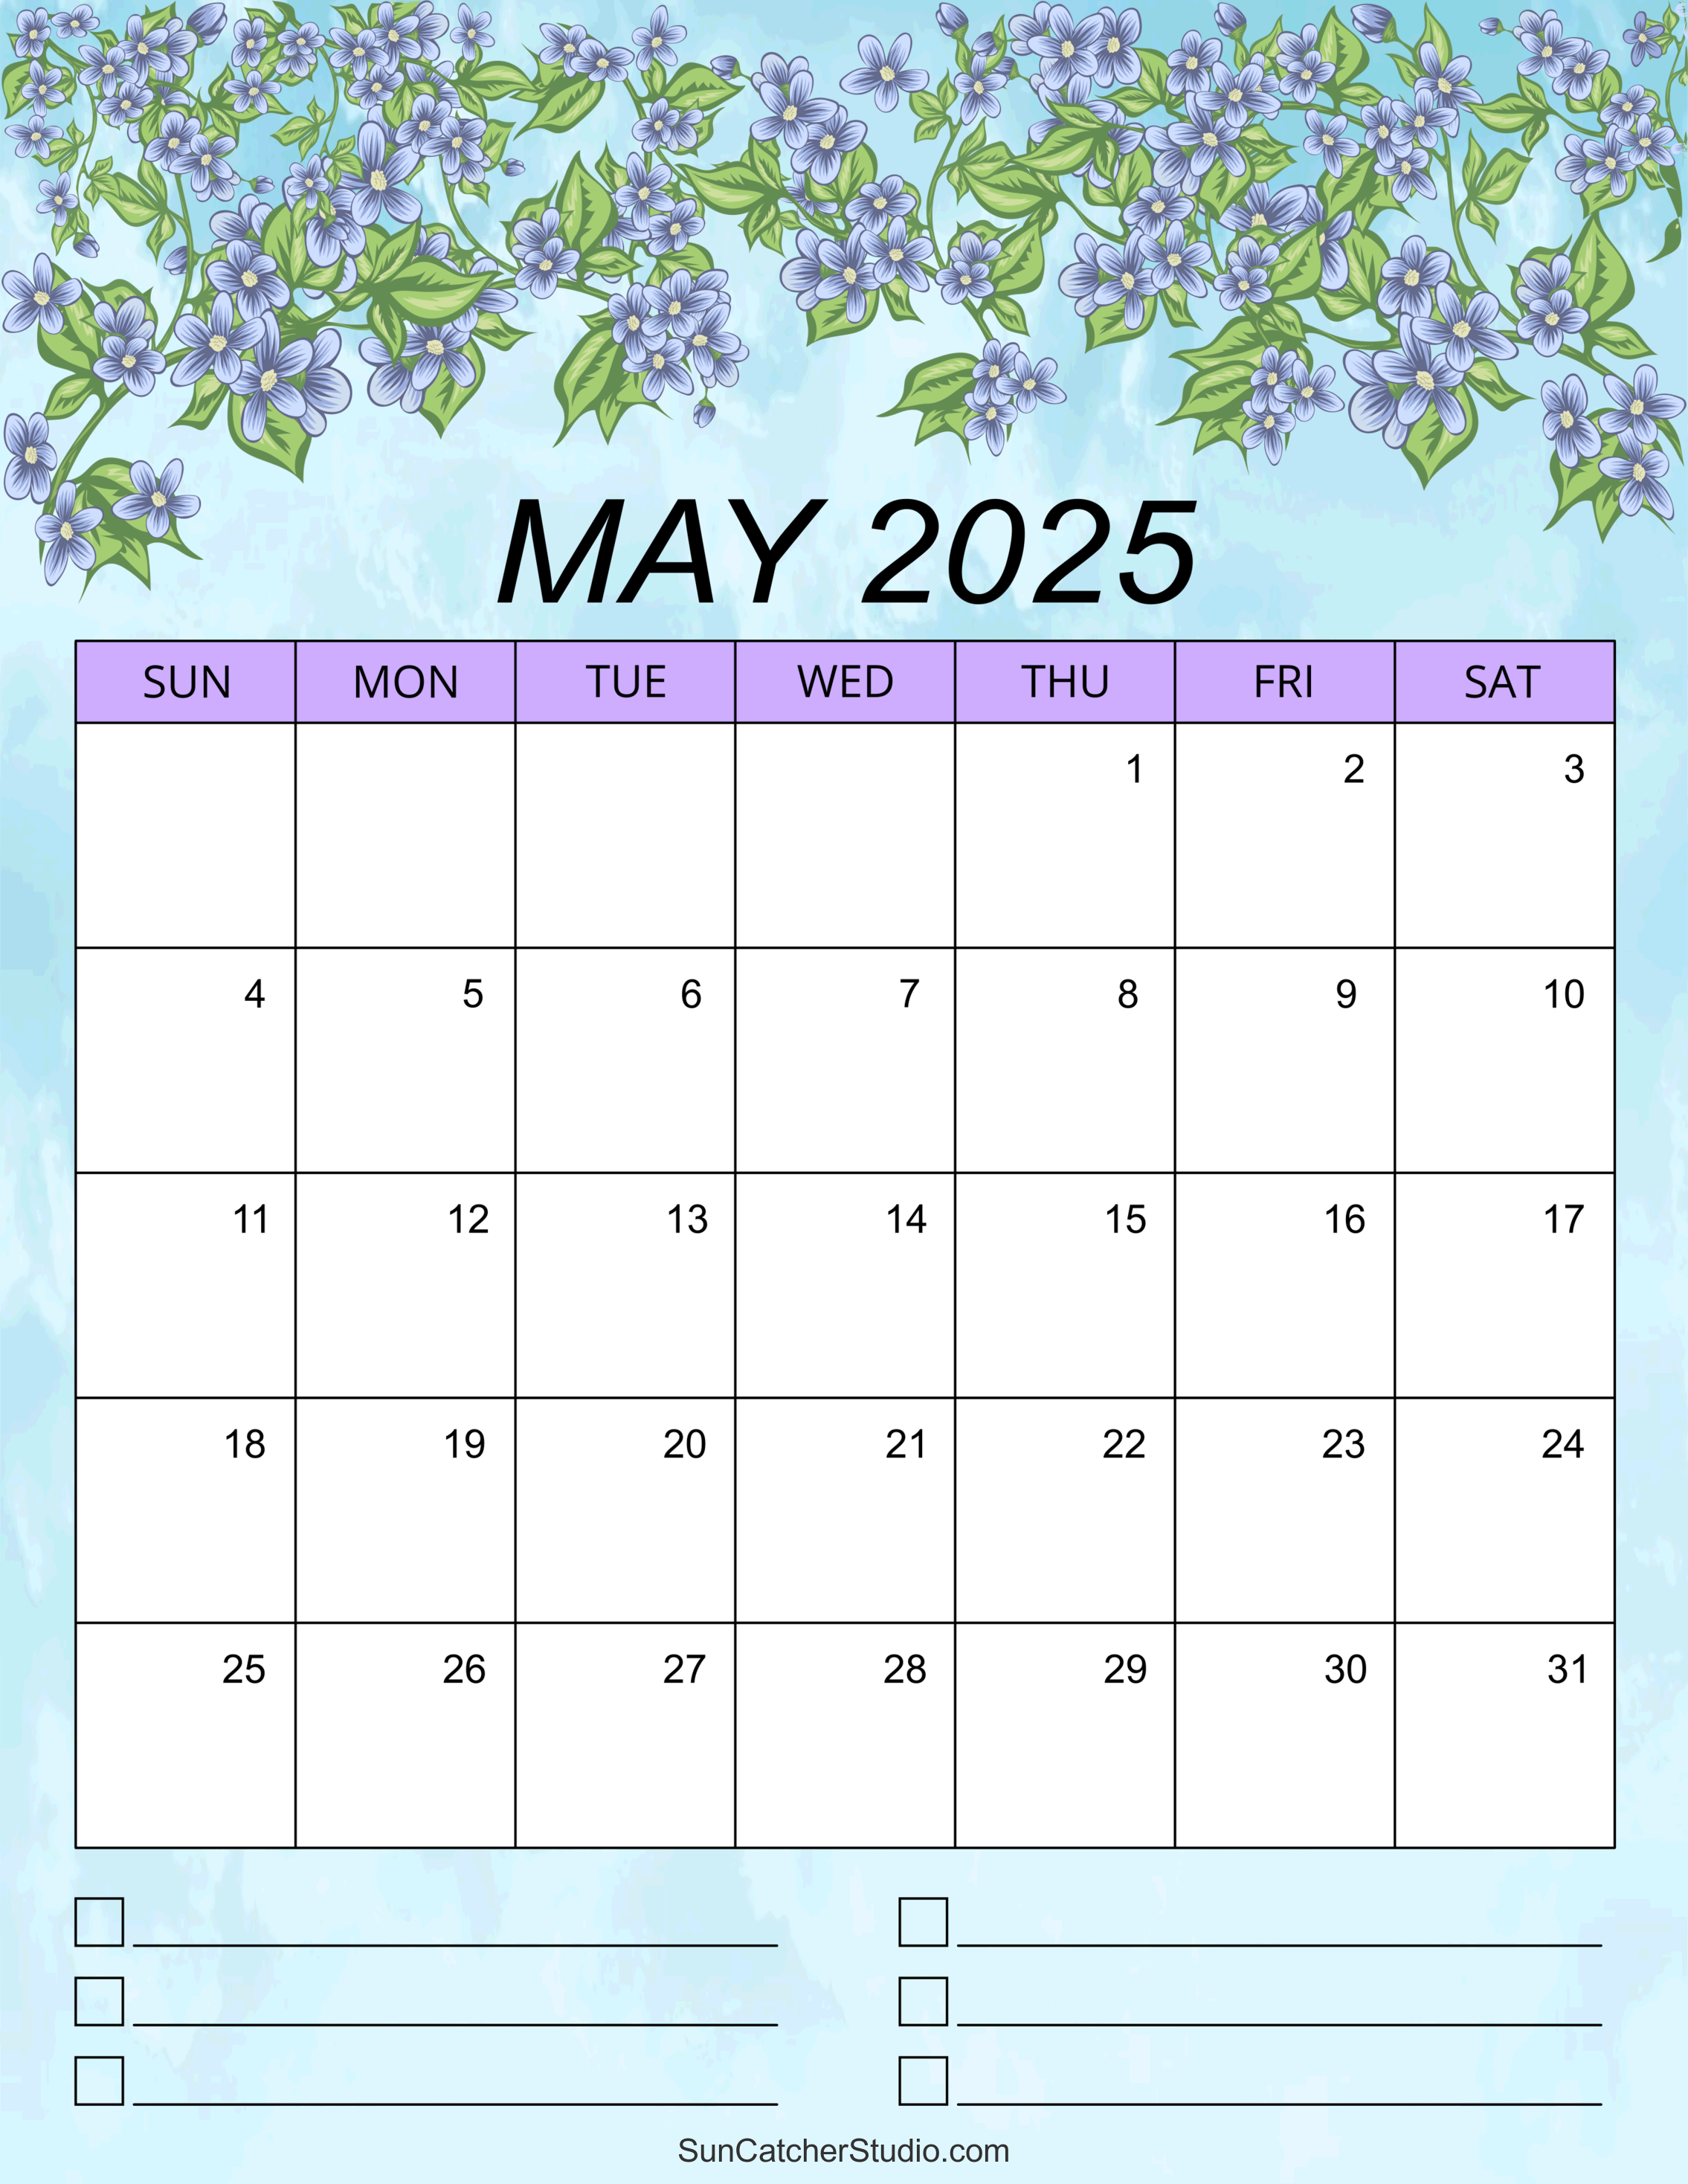 May 2025 Calendar (Free Printable) – DIY Projects, Patterns, Monograms, Designs, Templates